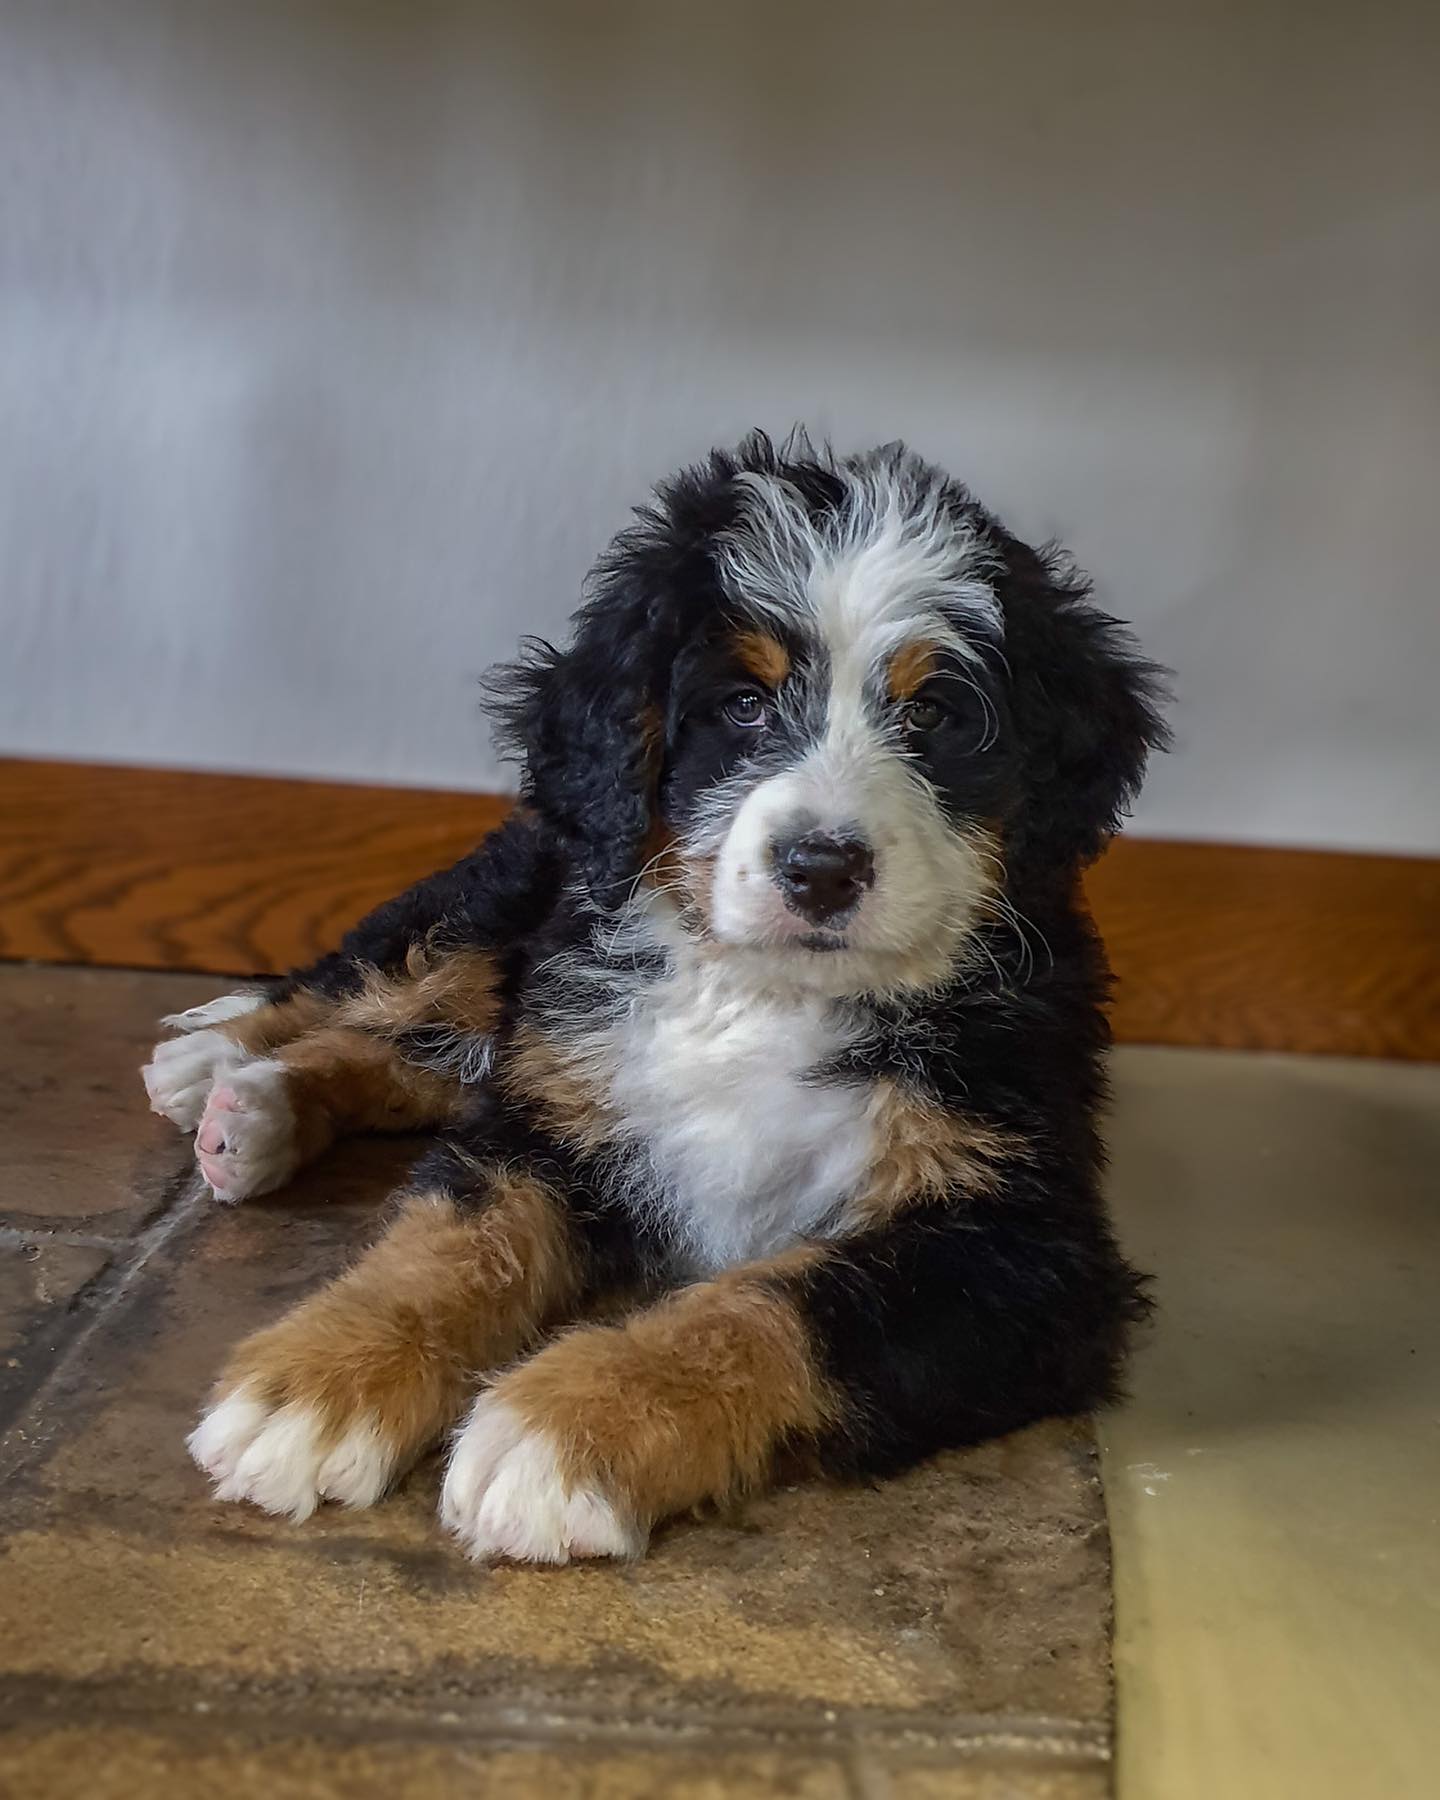 A Bernedoodle puppy in mid-play, capturing the breed's playful spirit and fluffy appearance